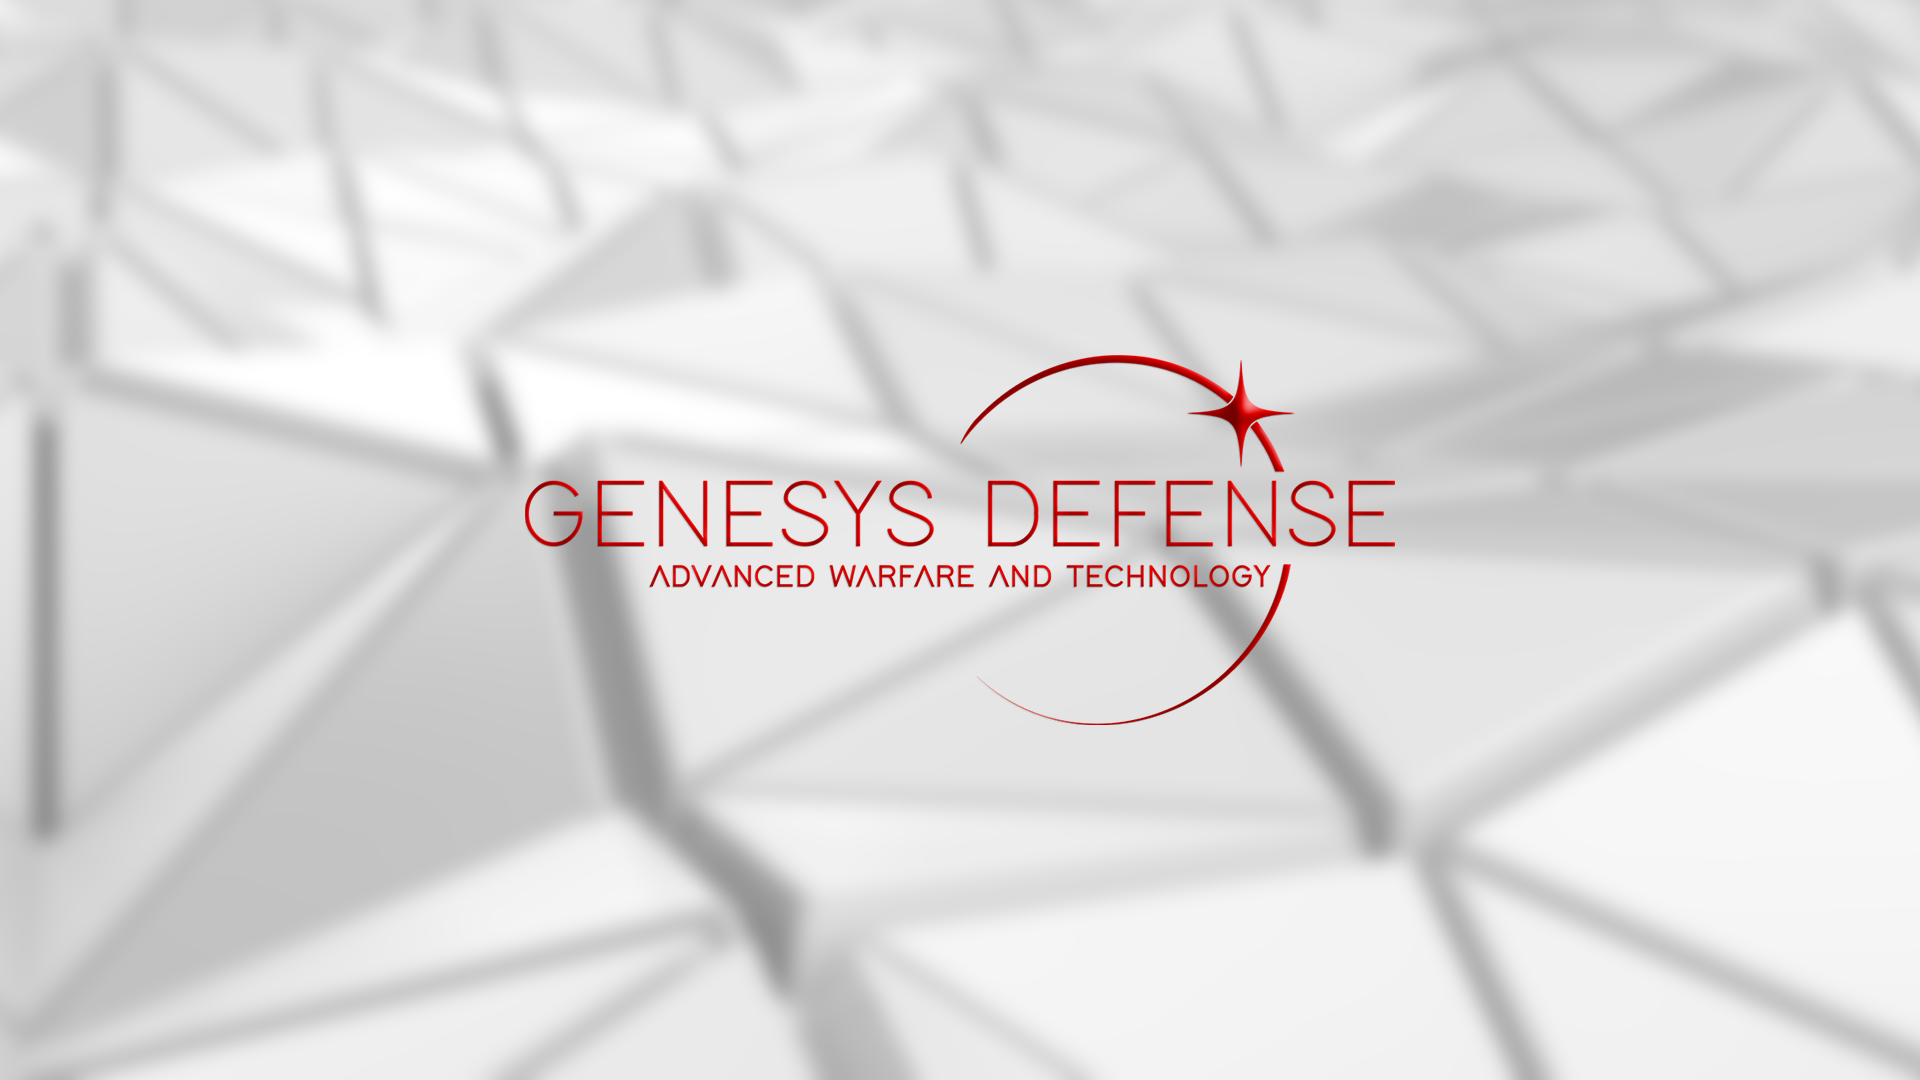 Genesys Defense and Technologies